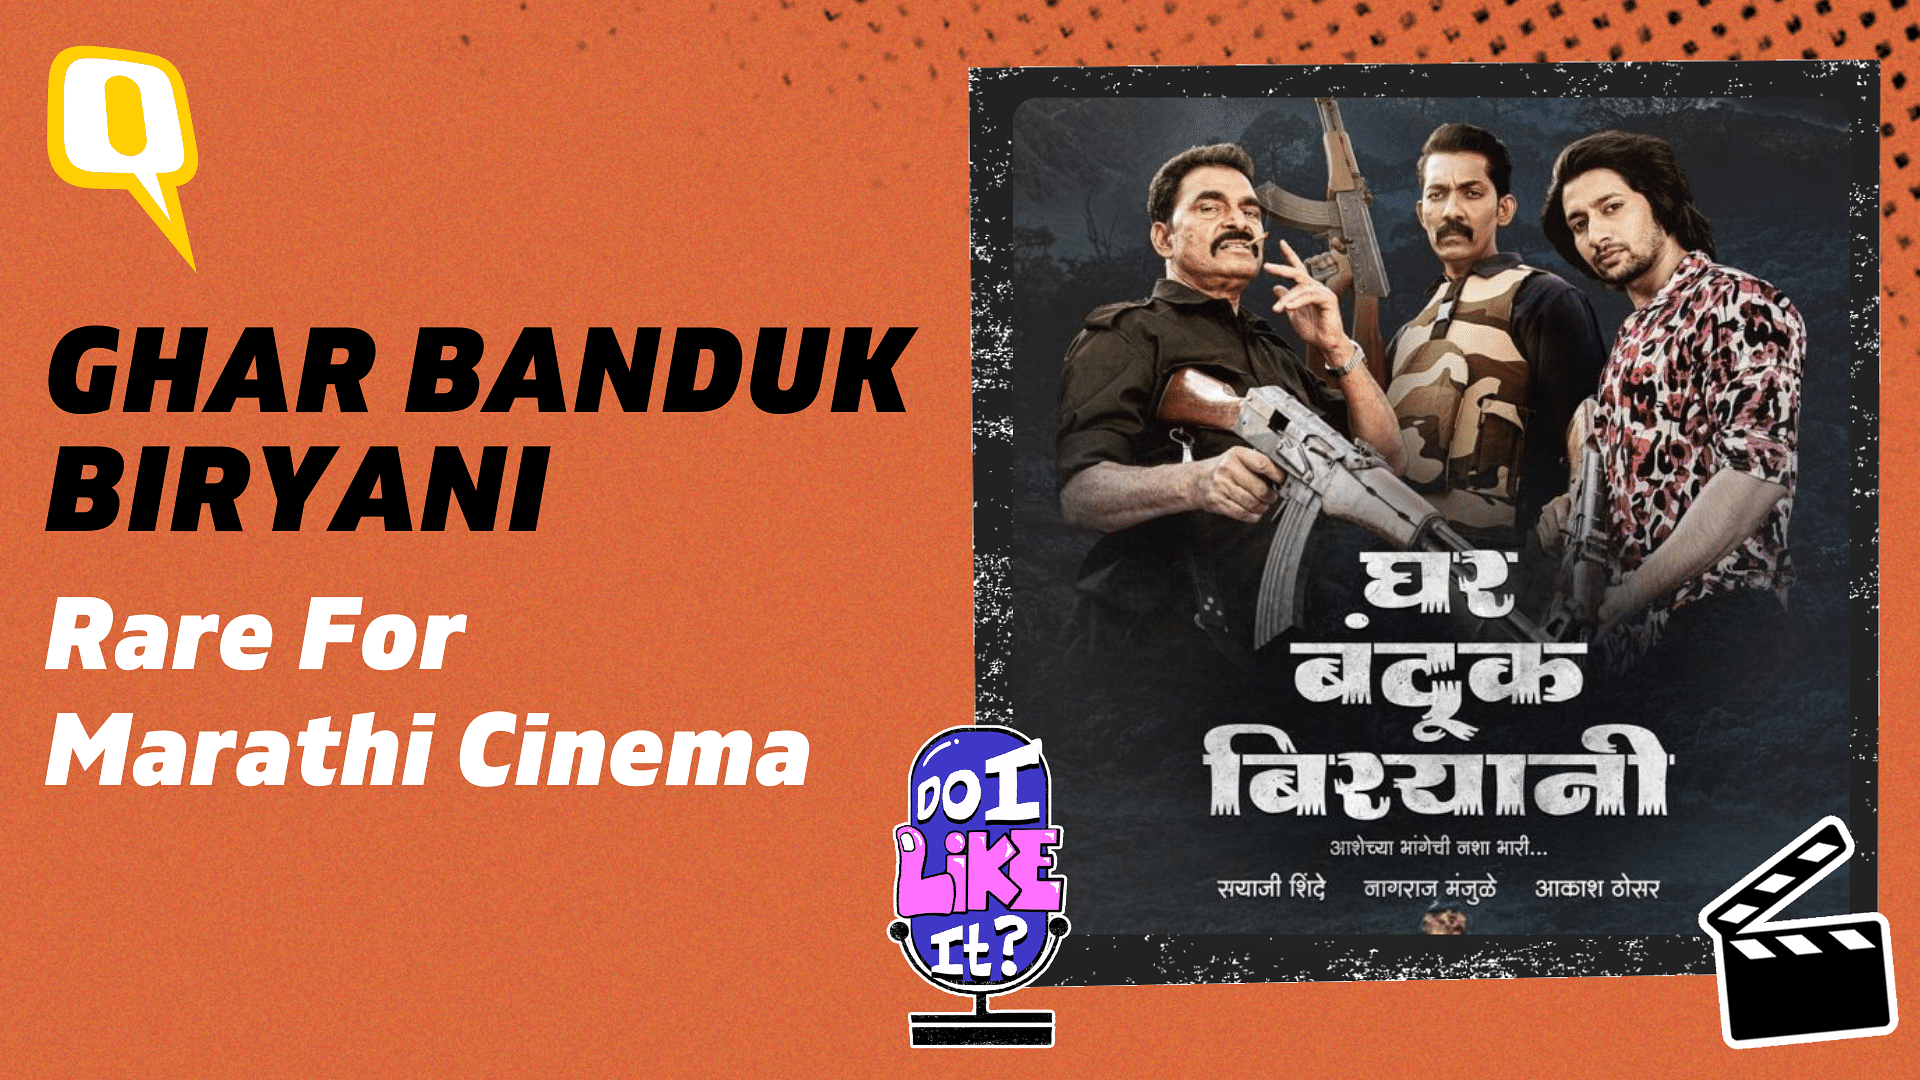 <div class="paragraphs"><p>Ghar Banduk Biryani is a Marathi film that portrays the good and bad of an otherwise gray world.</p></div>